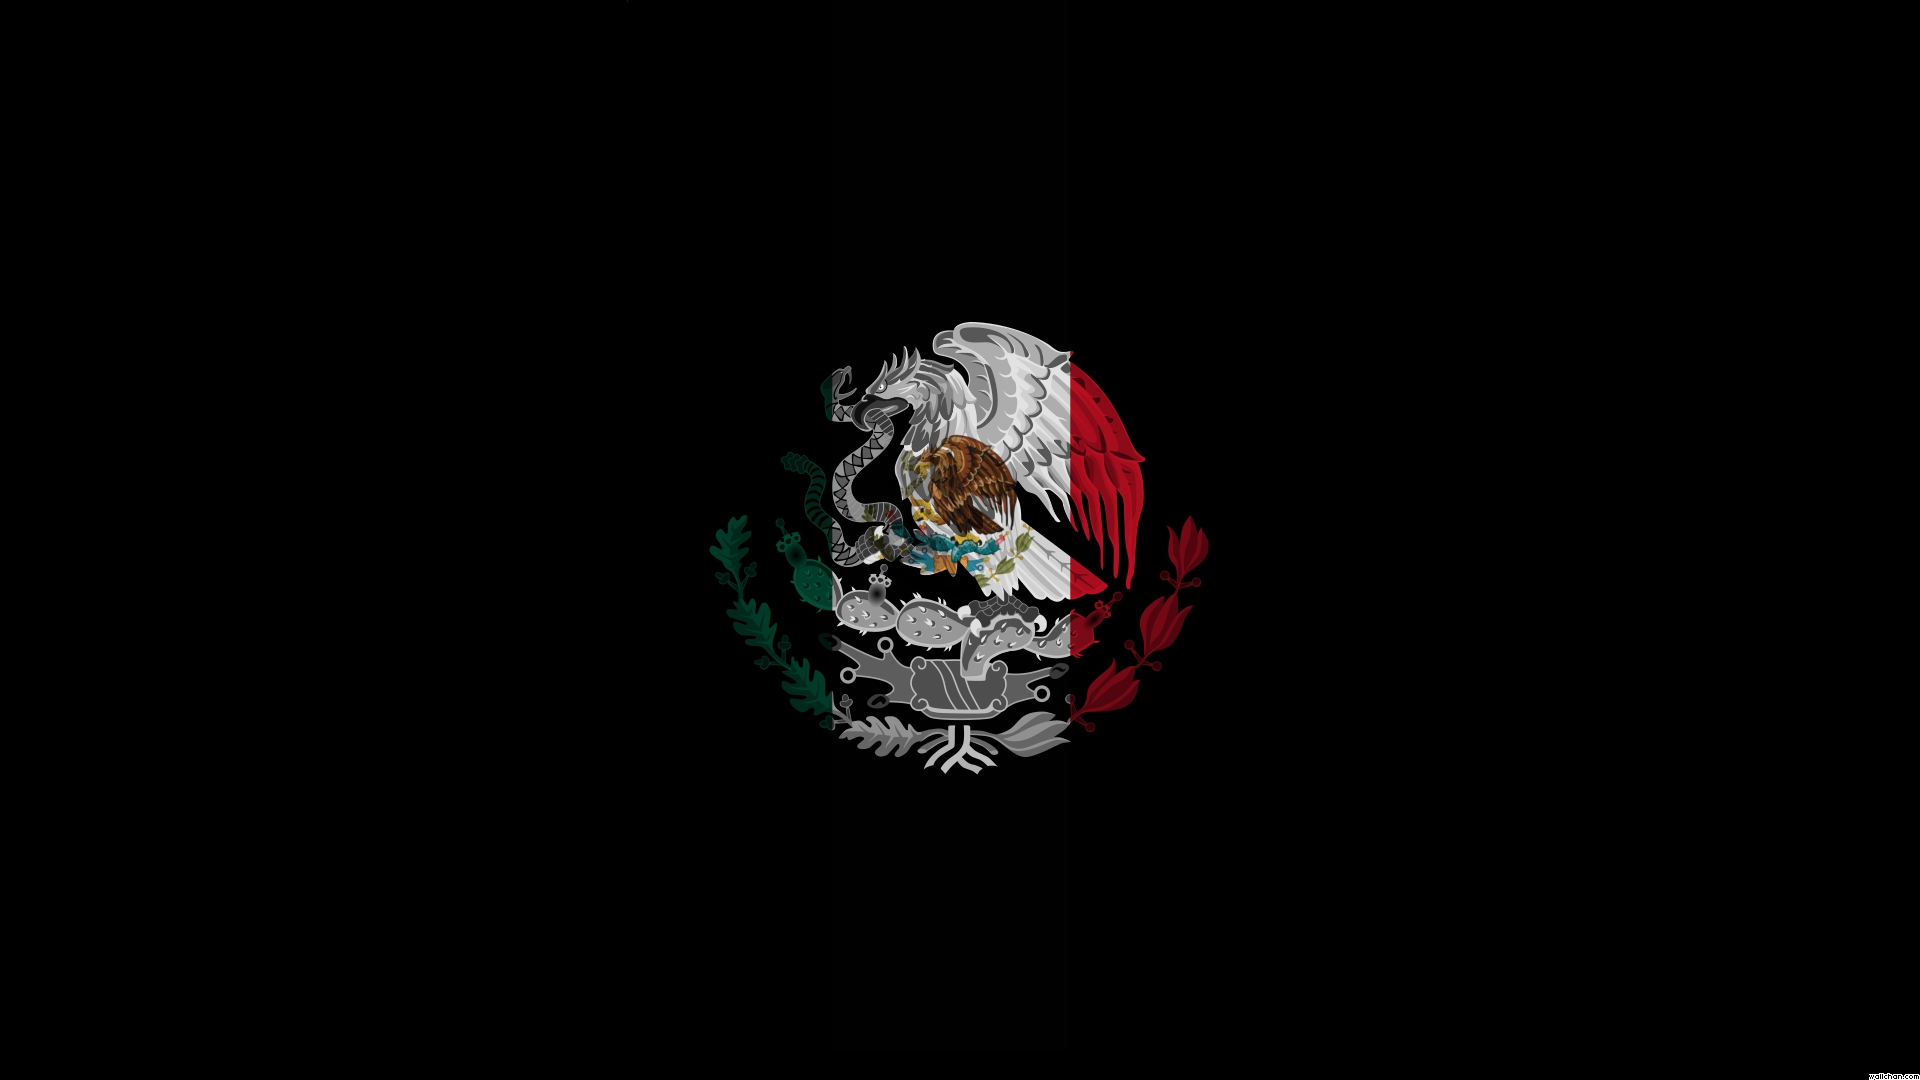 Title : cool mexico flag wallpaper places to visit pinterest mexico flag Di...